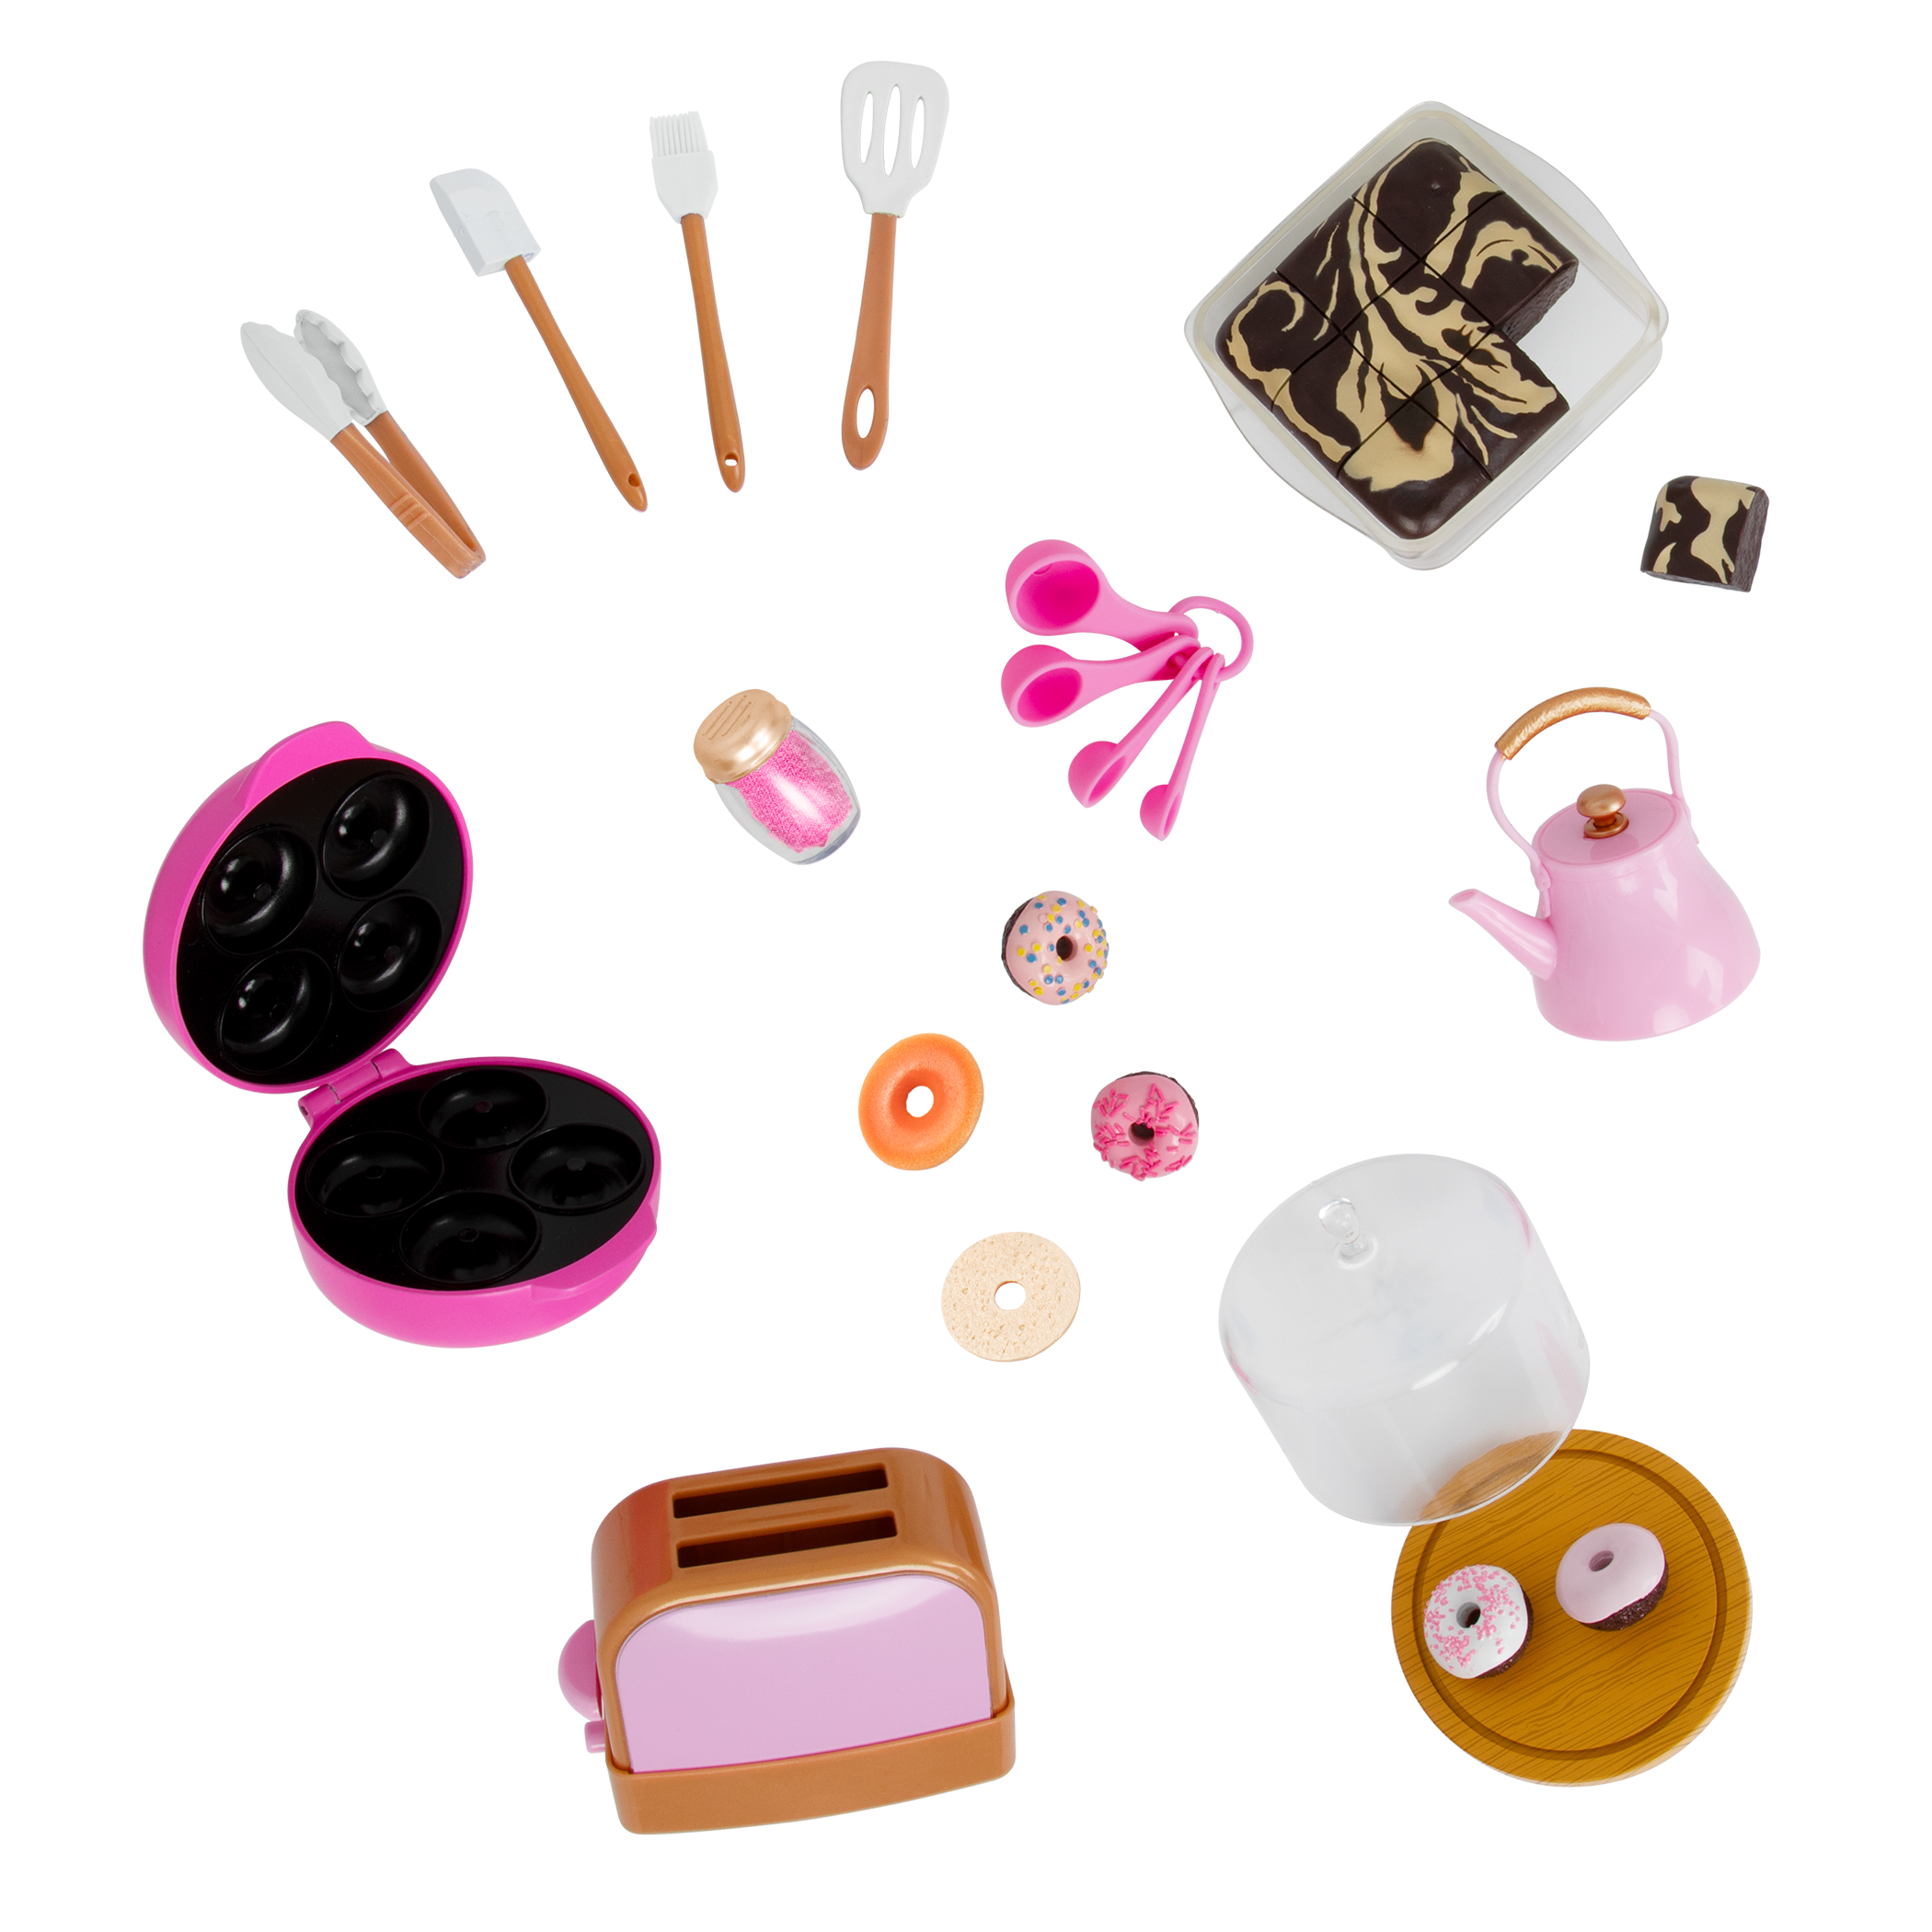 18-inch doll with baking playset